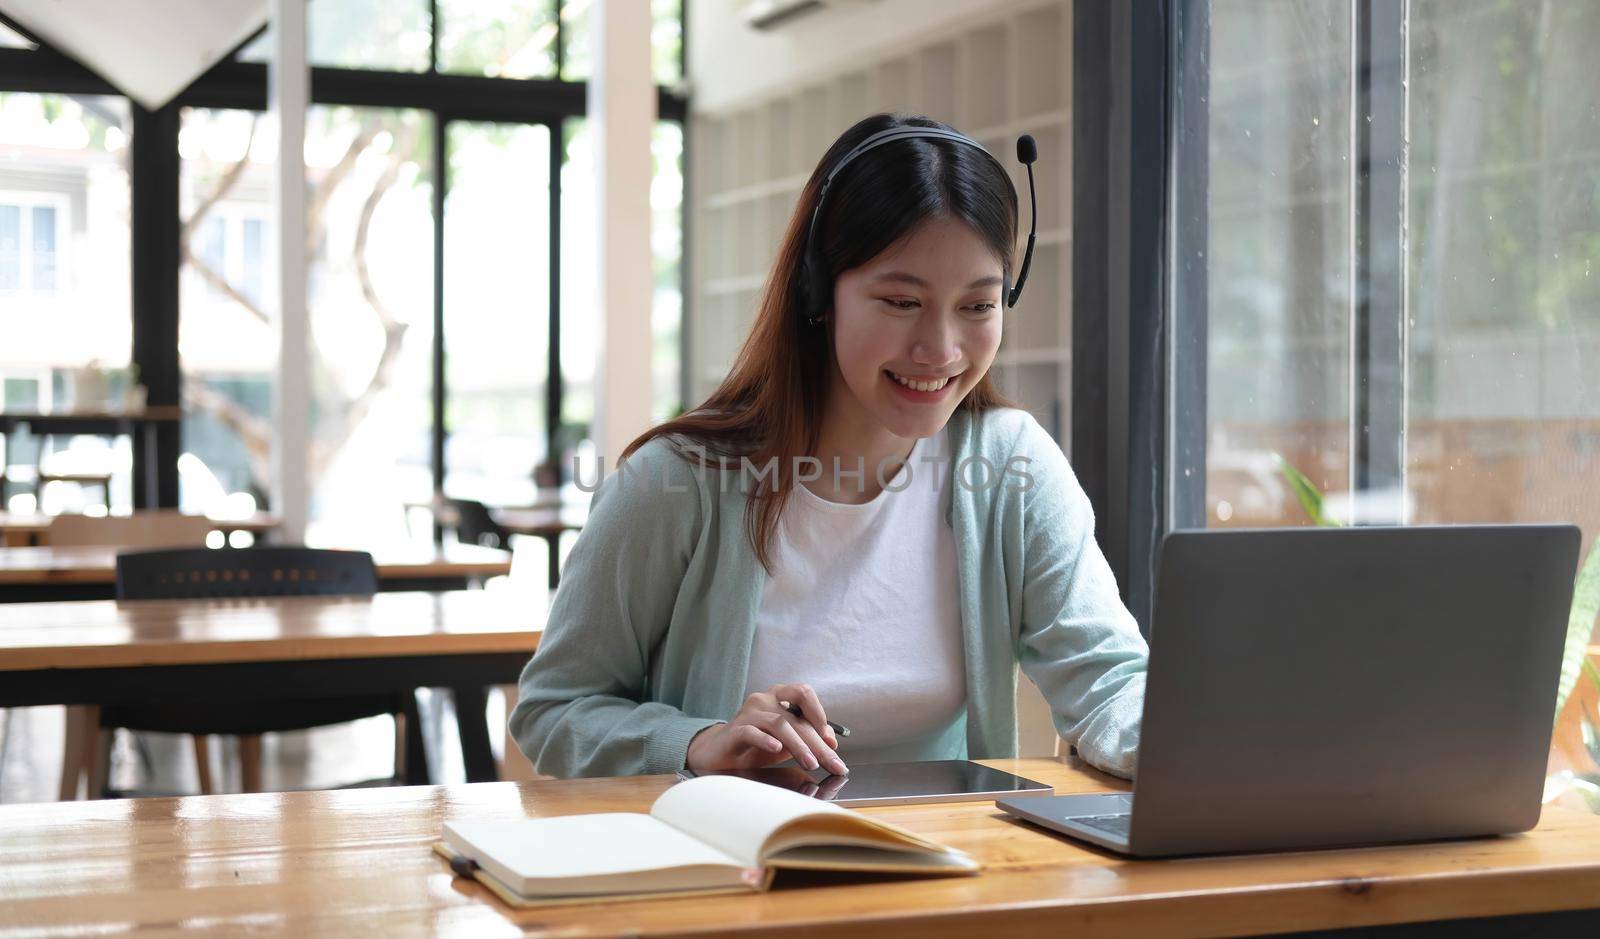 Happy young woman in headphones speaking looking at laptop making notes, girl student talking by video conference call, female teacher trainer tutoring by webcam, online training, e-coaching concept by wichayada